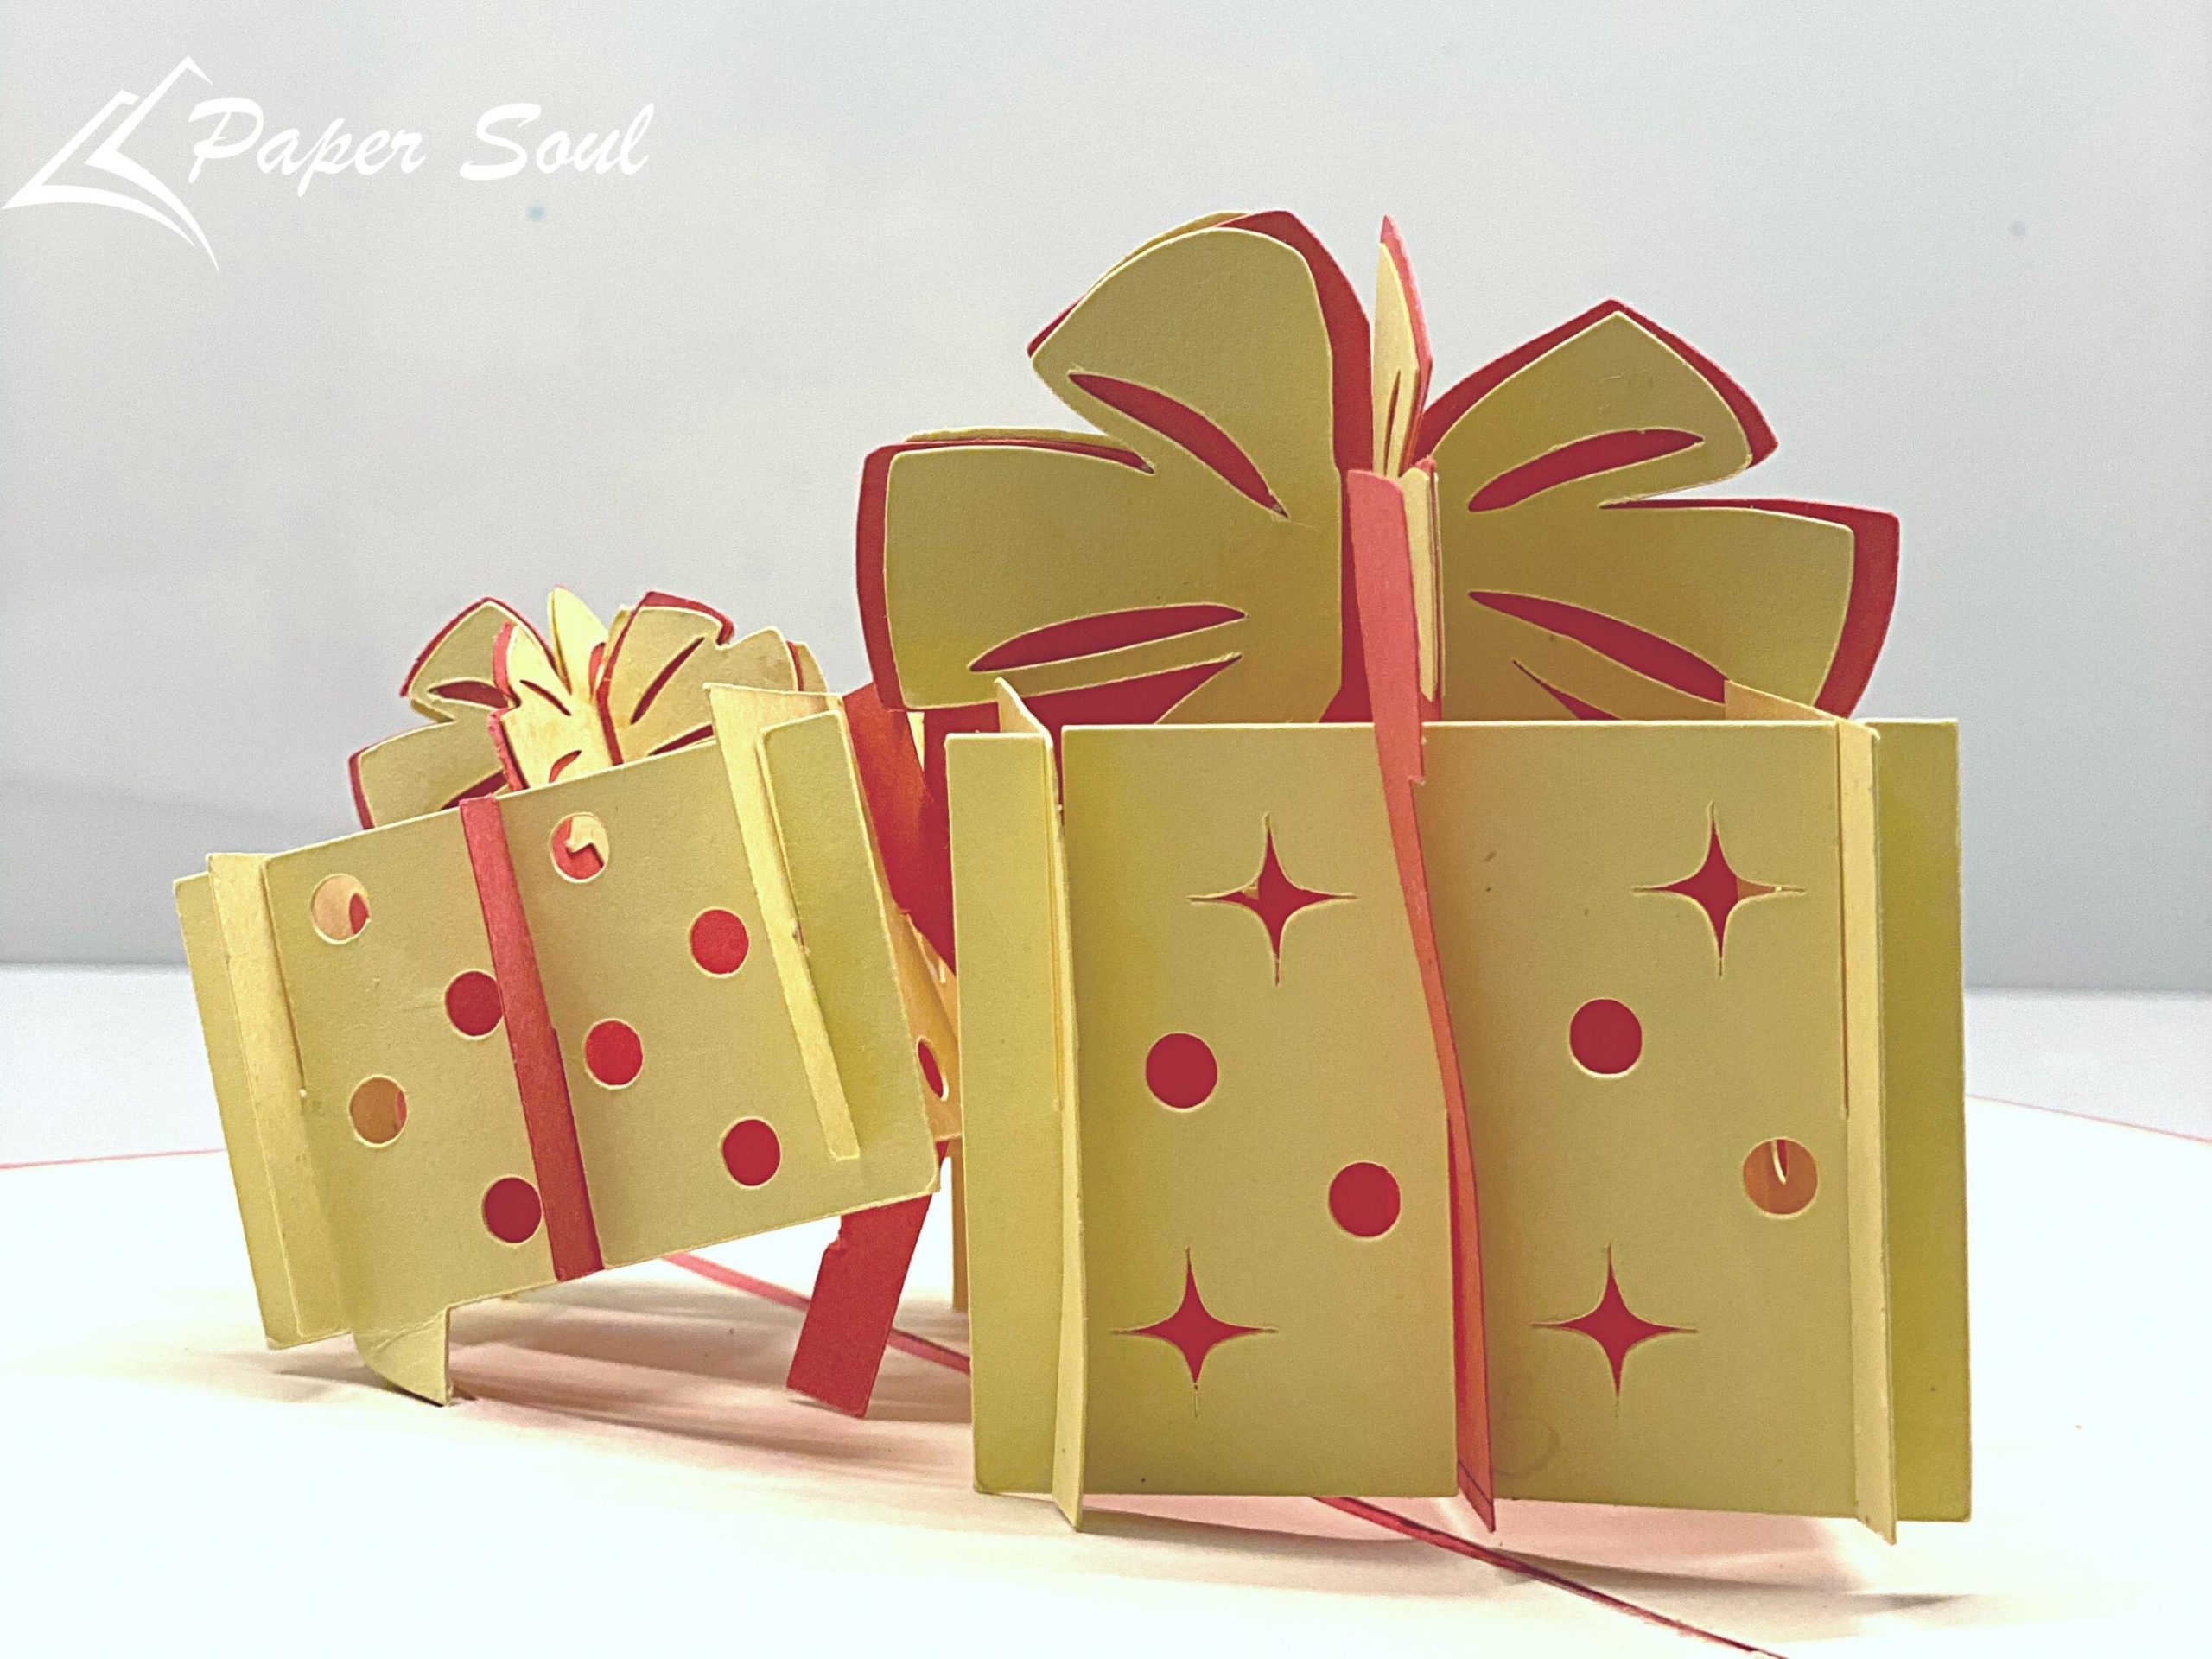 Three Dimensional Box PNG Transparent, Christmas Three Dimensional Gift Box  Packaging, Christmas, Gift Box, Gift PNG Image For Free Download | Gift box  packaging, Christmas gift background, Christmas tree with gifts